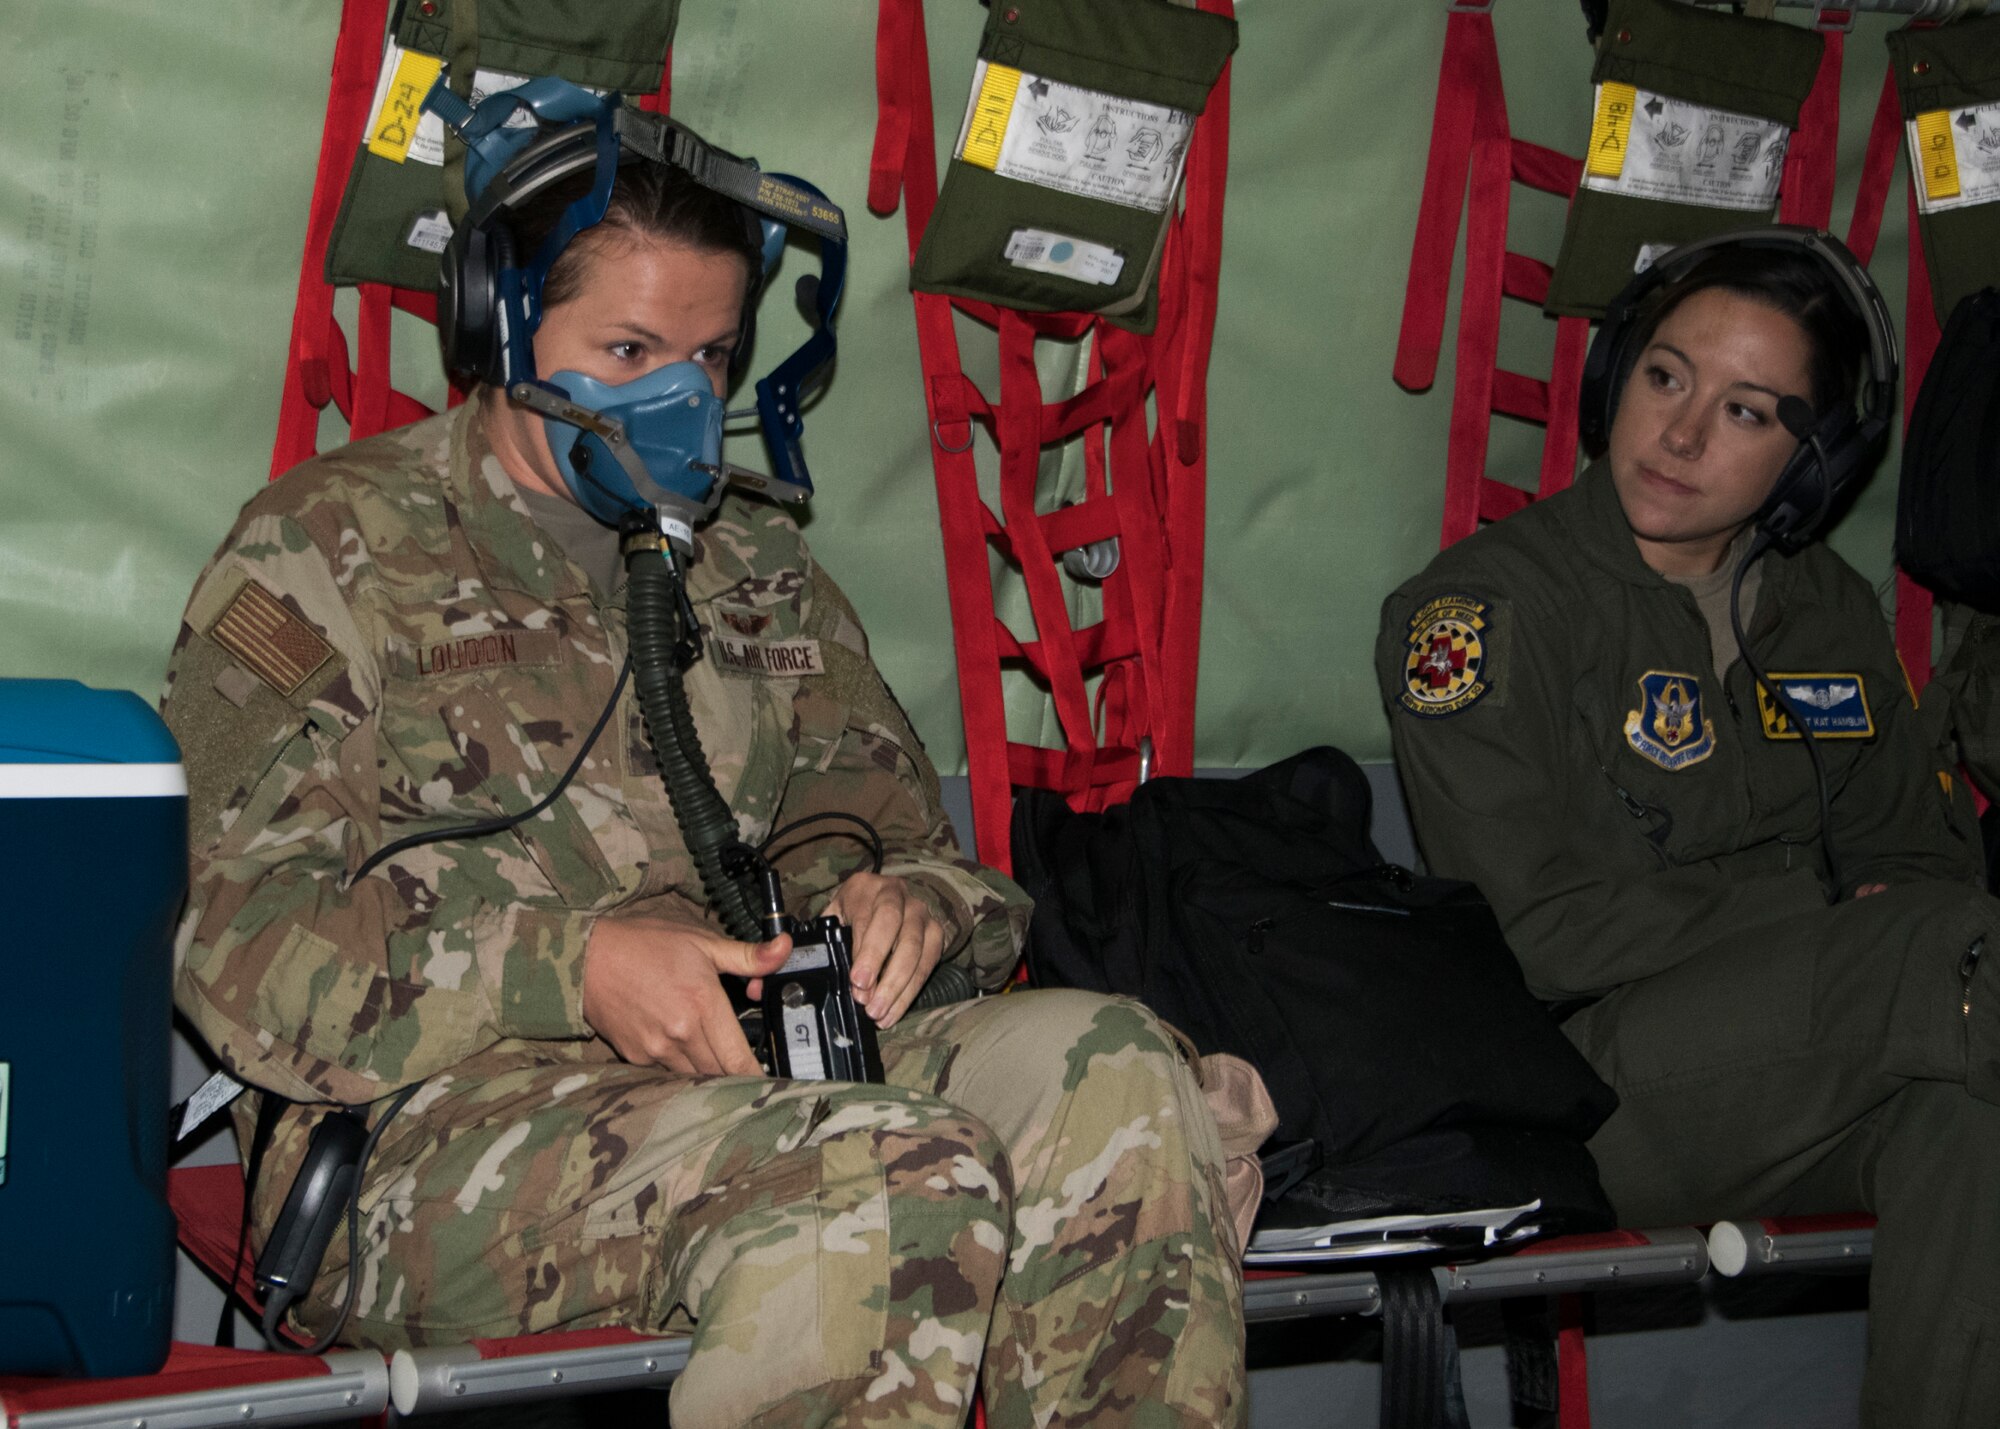 Staff Sgt. Sarah Loudon, 459th Aeromedical Evacuation Squadron flight medic, puts on an oxygen mask as part of an in-flight aircraft emergency as Master Sgt. Kat Hamblin, 459 AES flight instructor observes, during an off  station trainer held on a KC-135 Stratotanker Sept. 20, 2019. The AES team conducted training during a flight to Wright Patterson, Ohio, where they later participated in the Air Force Marathon. (U.S. Air Force photo by Staff Sgt. Cierra Presentado/Released)